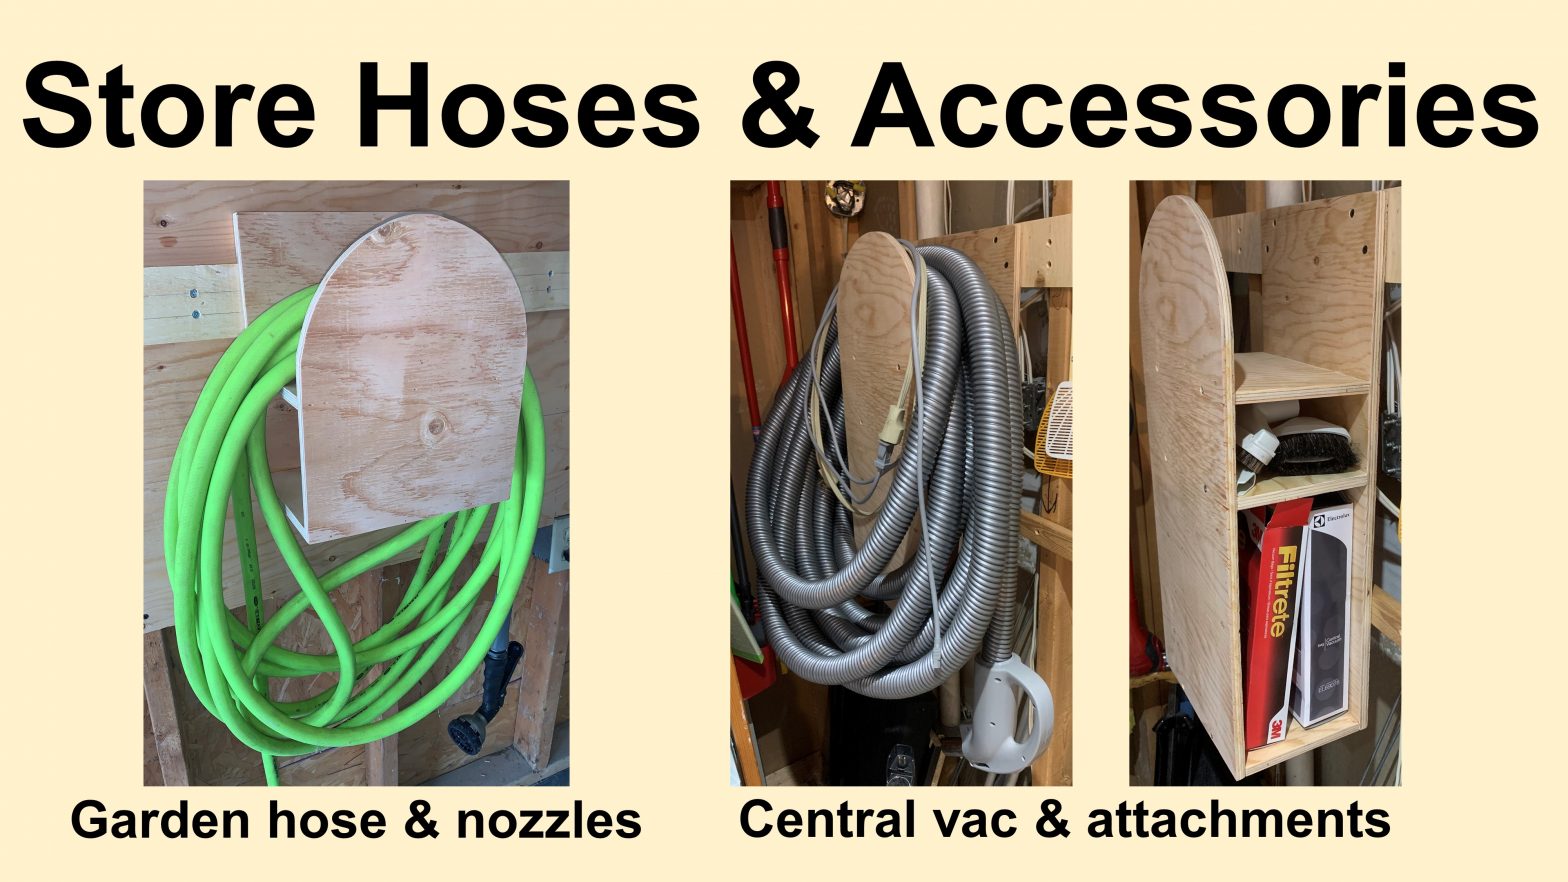 Customizable Hose Hanger with Storage – use on French cleat wall